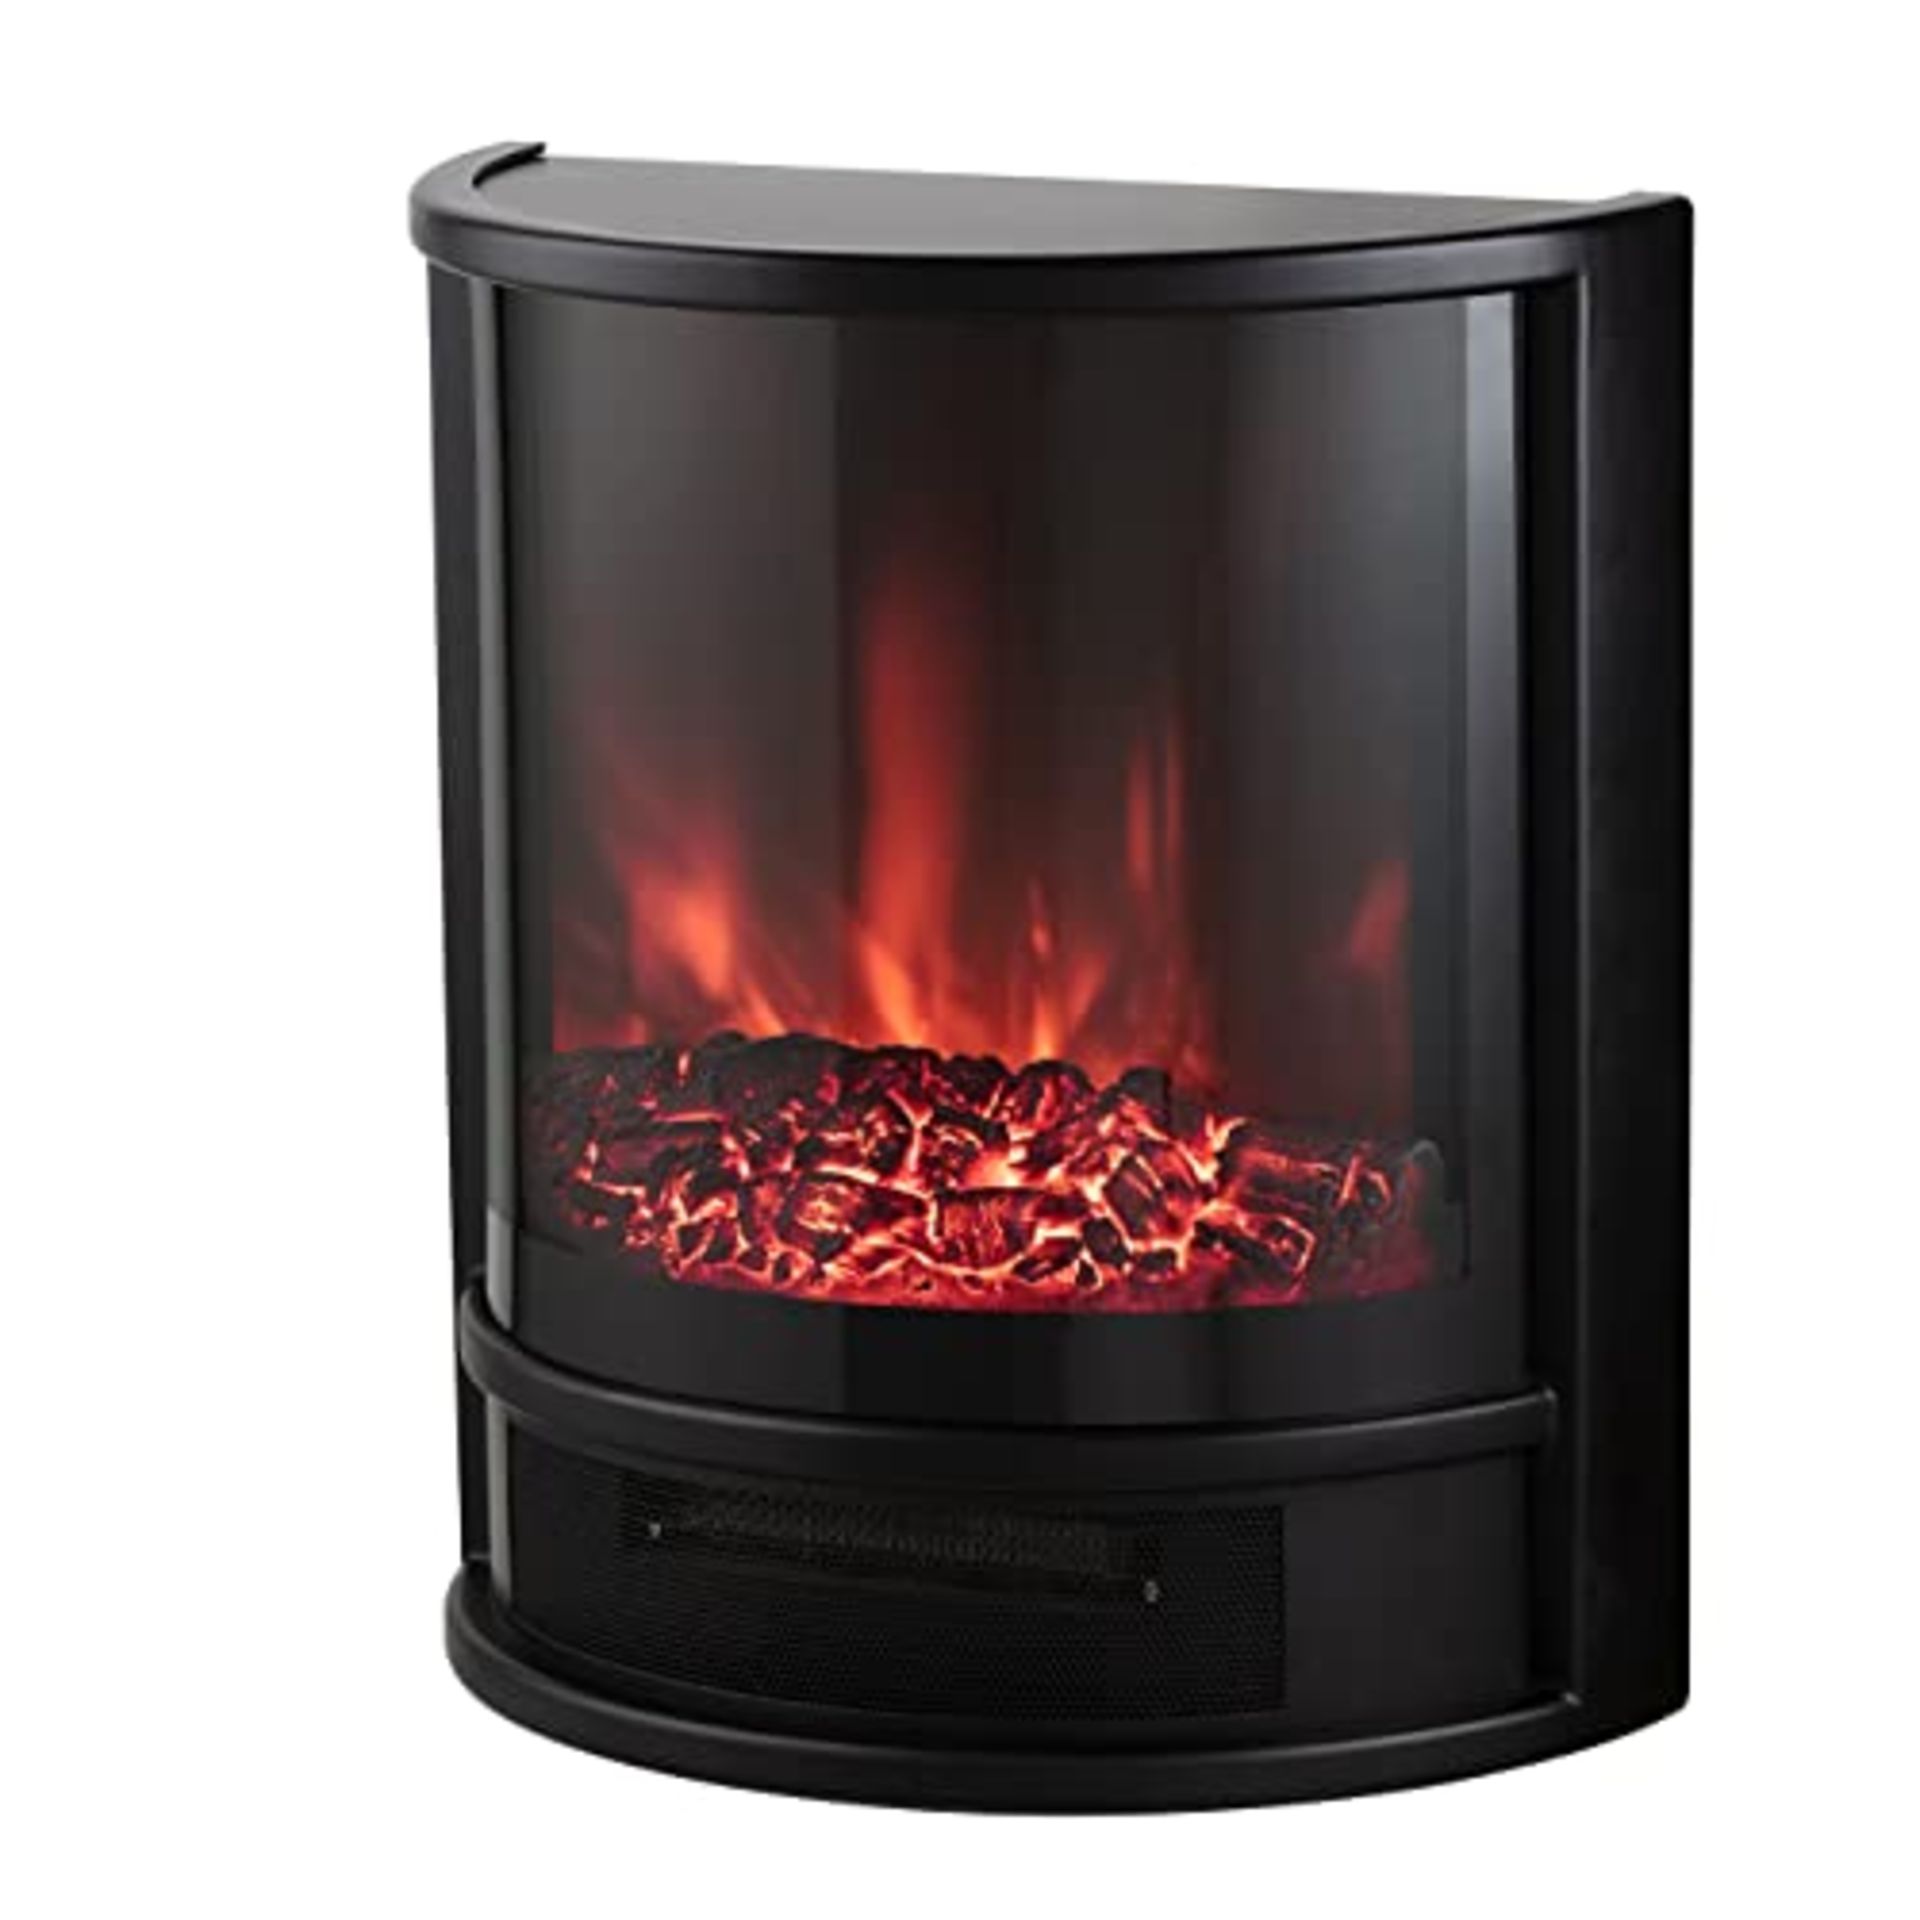 RRP £99.00 Warmlite WL46031 Lavenham 1.8kW LED Log Effect Fire Stove with Adjustable Thermostat C